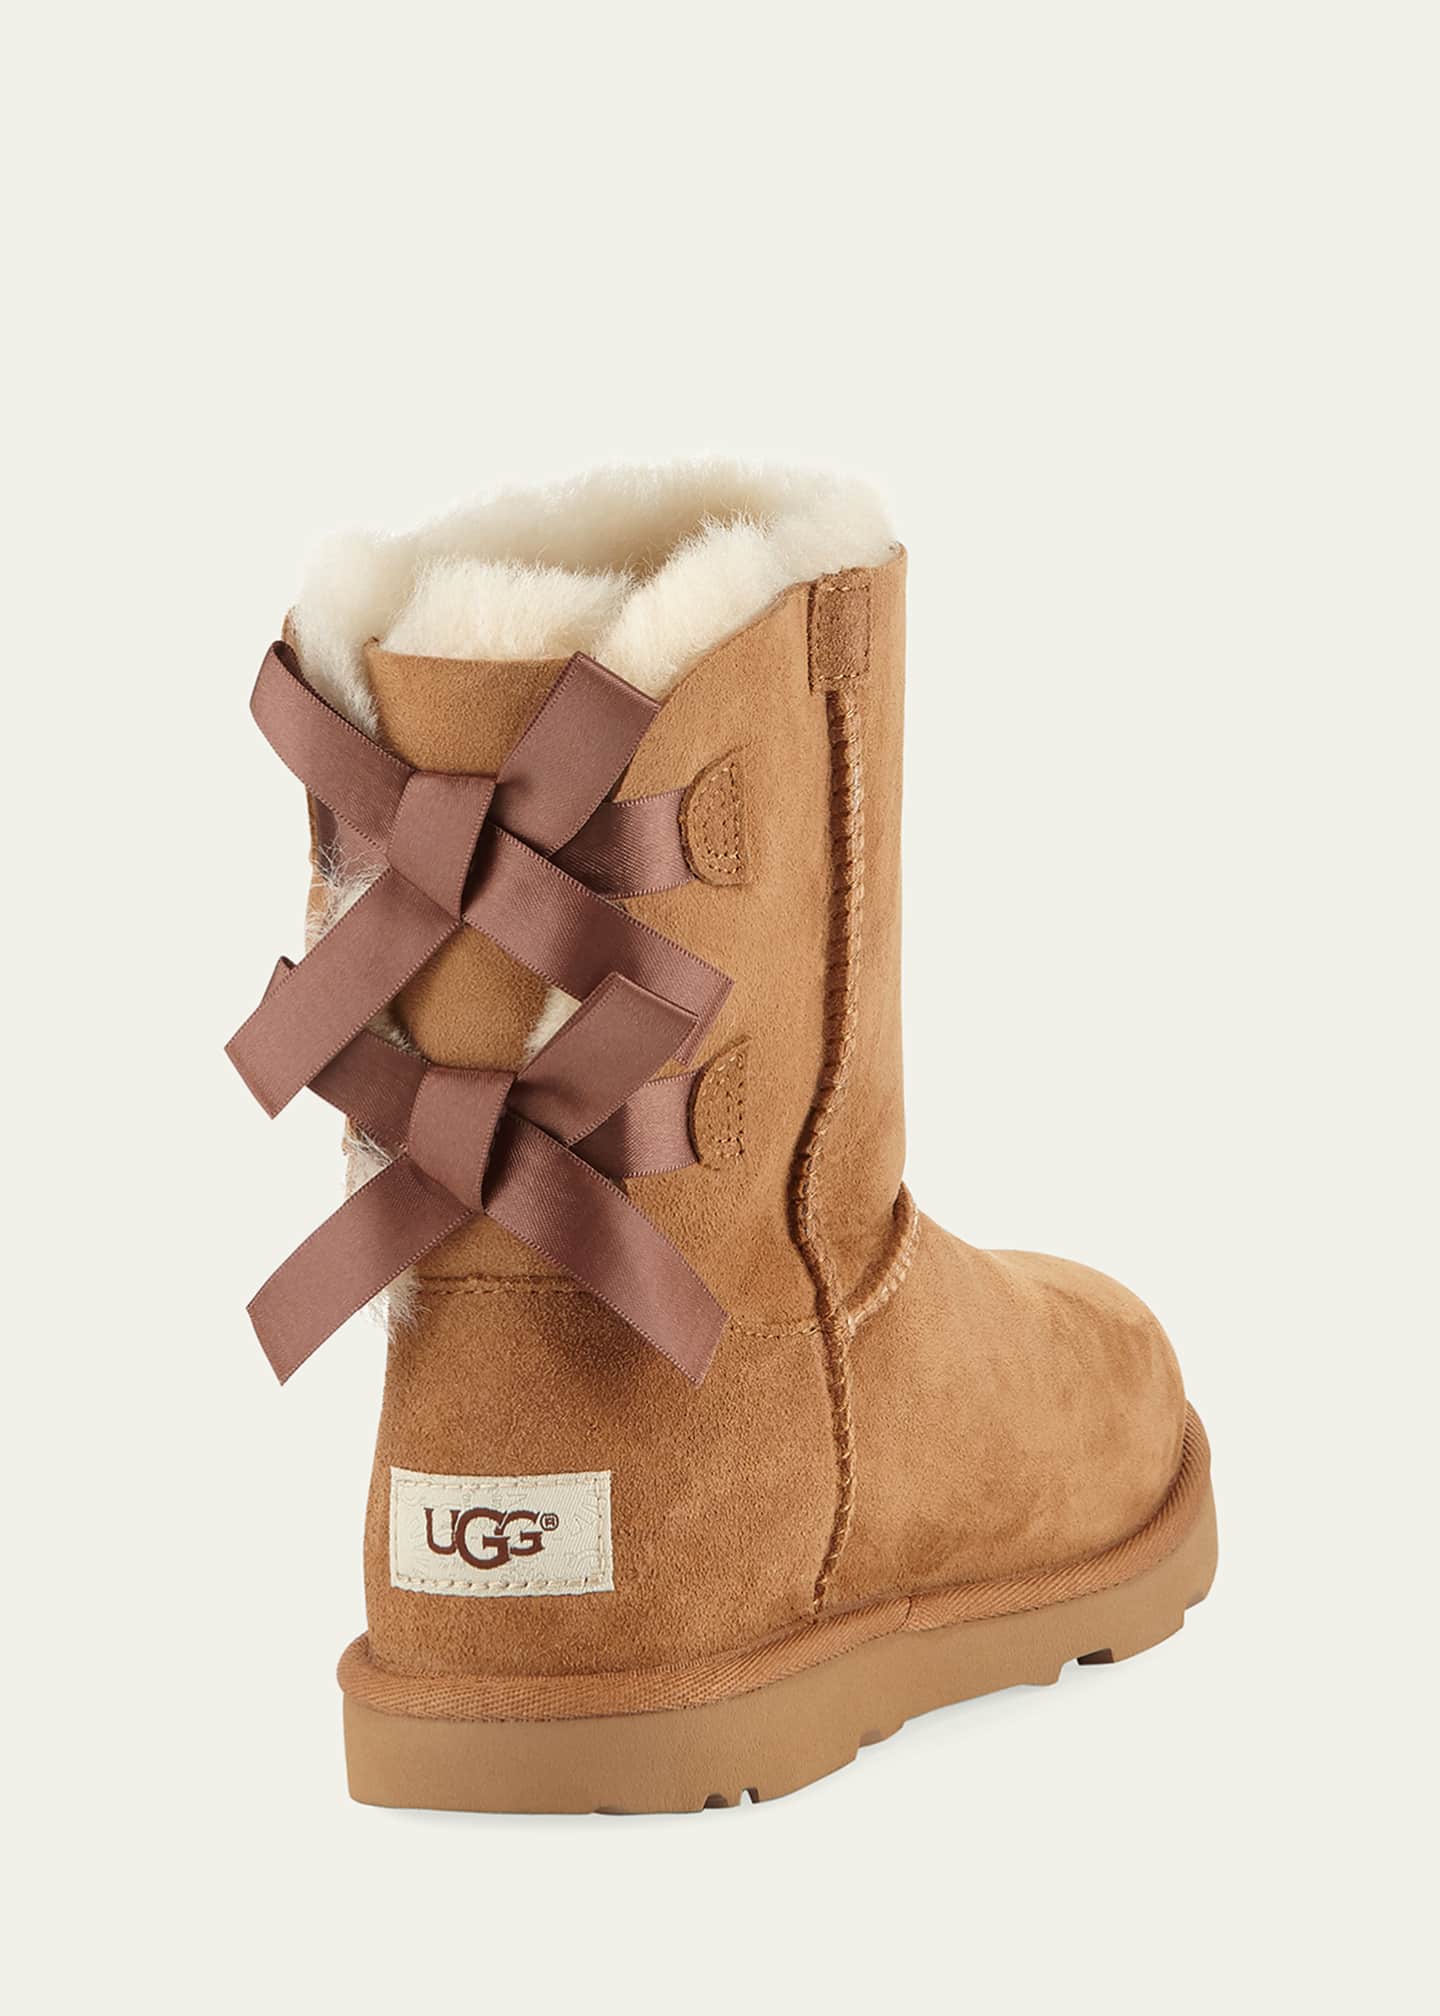 UGG Girl's Bailey Bow II Crisscross Ribbon Suede Boots, Kids Image 3 of 4